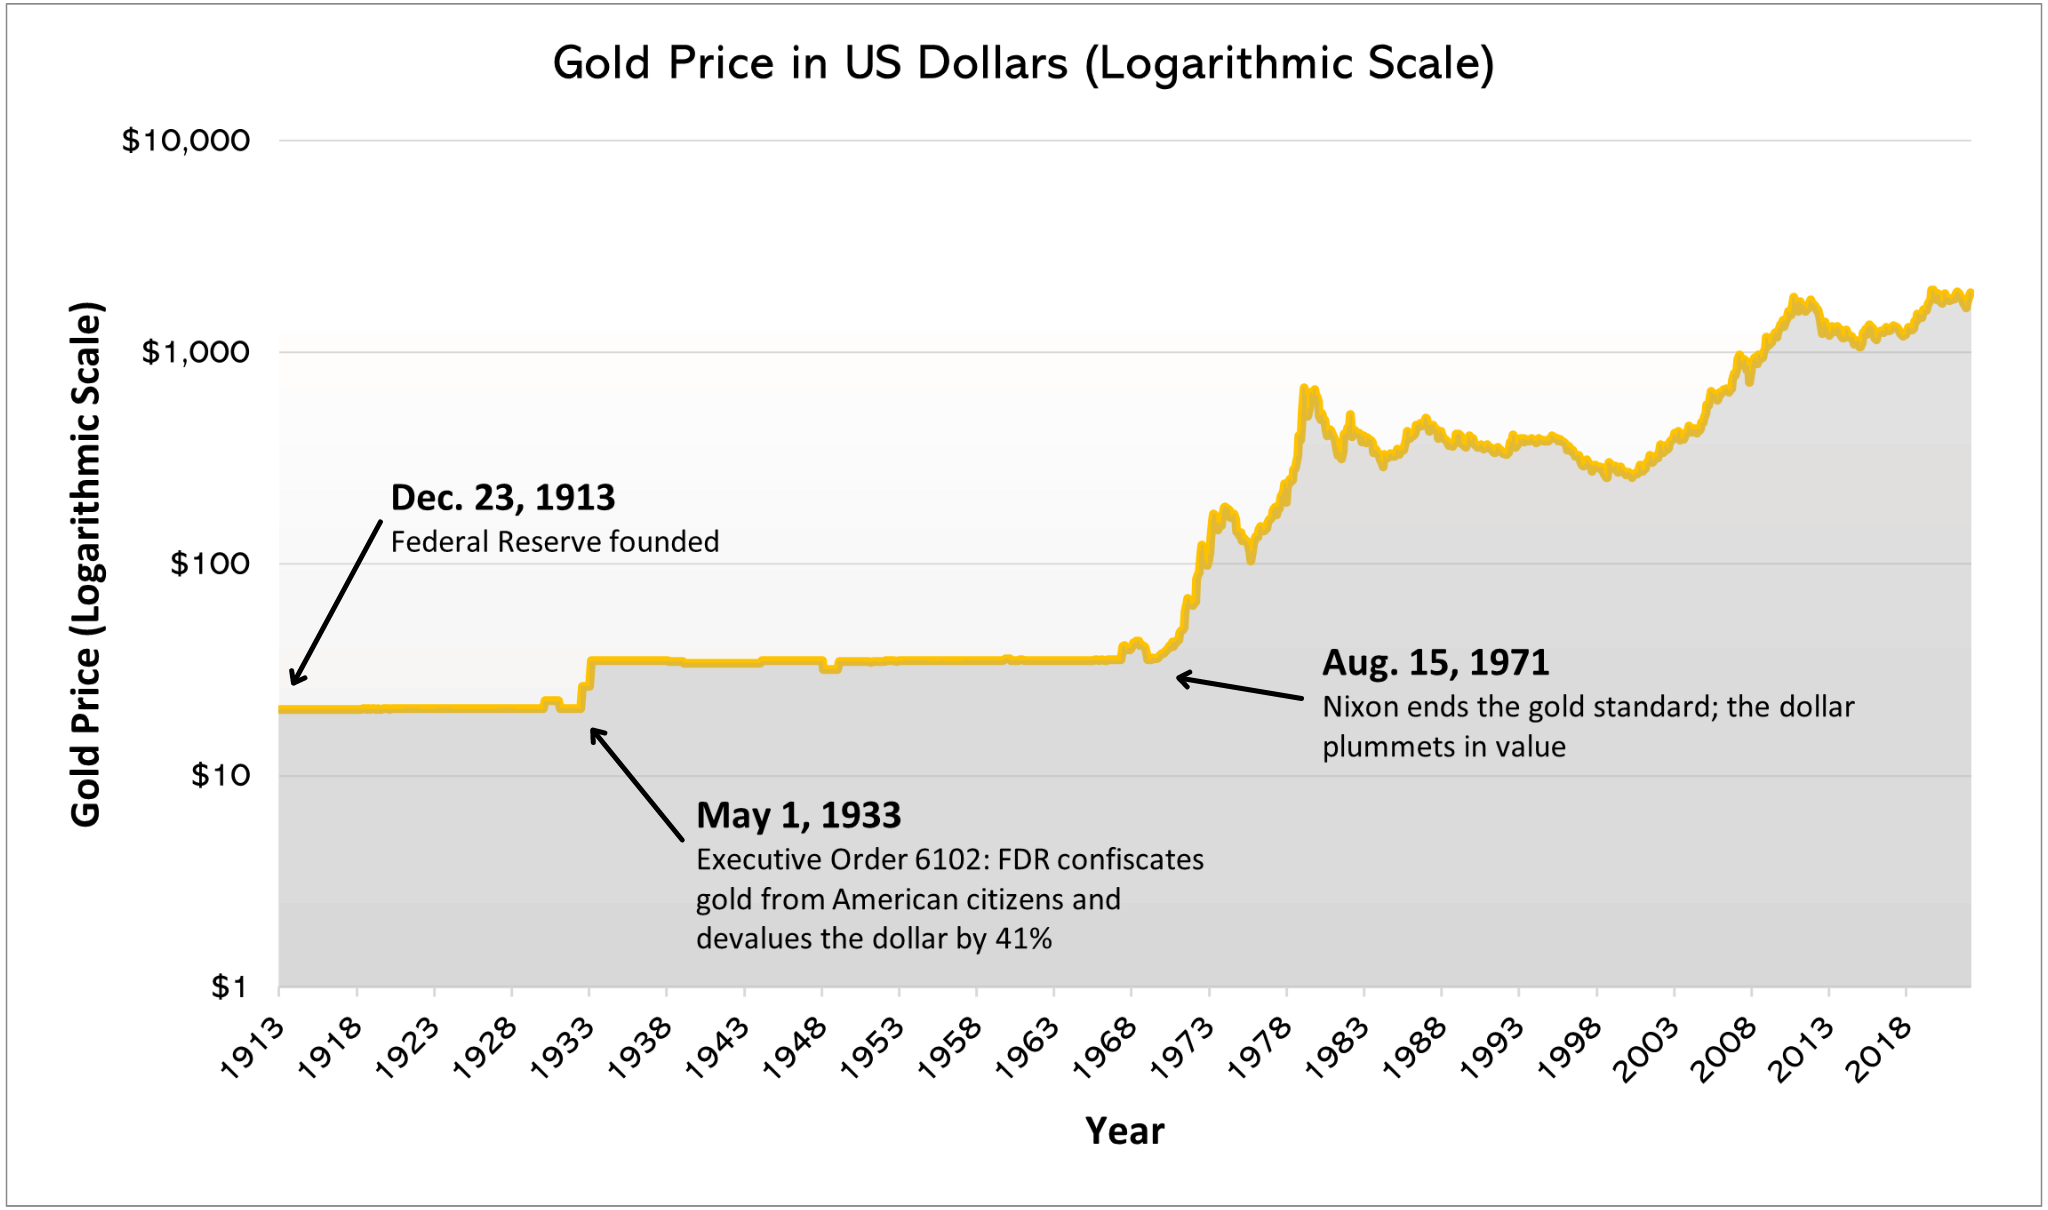 Gold Price in US Dollars (Logarithmic Scale)